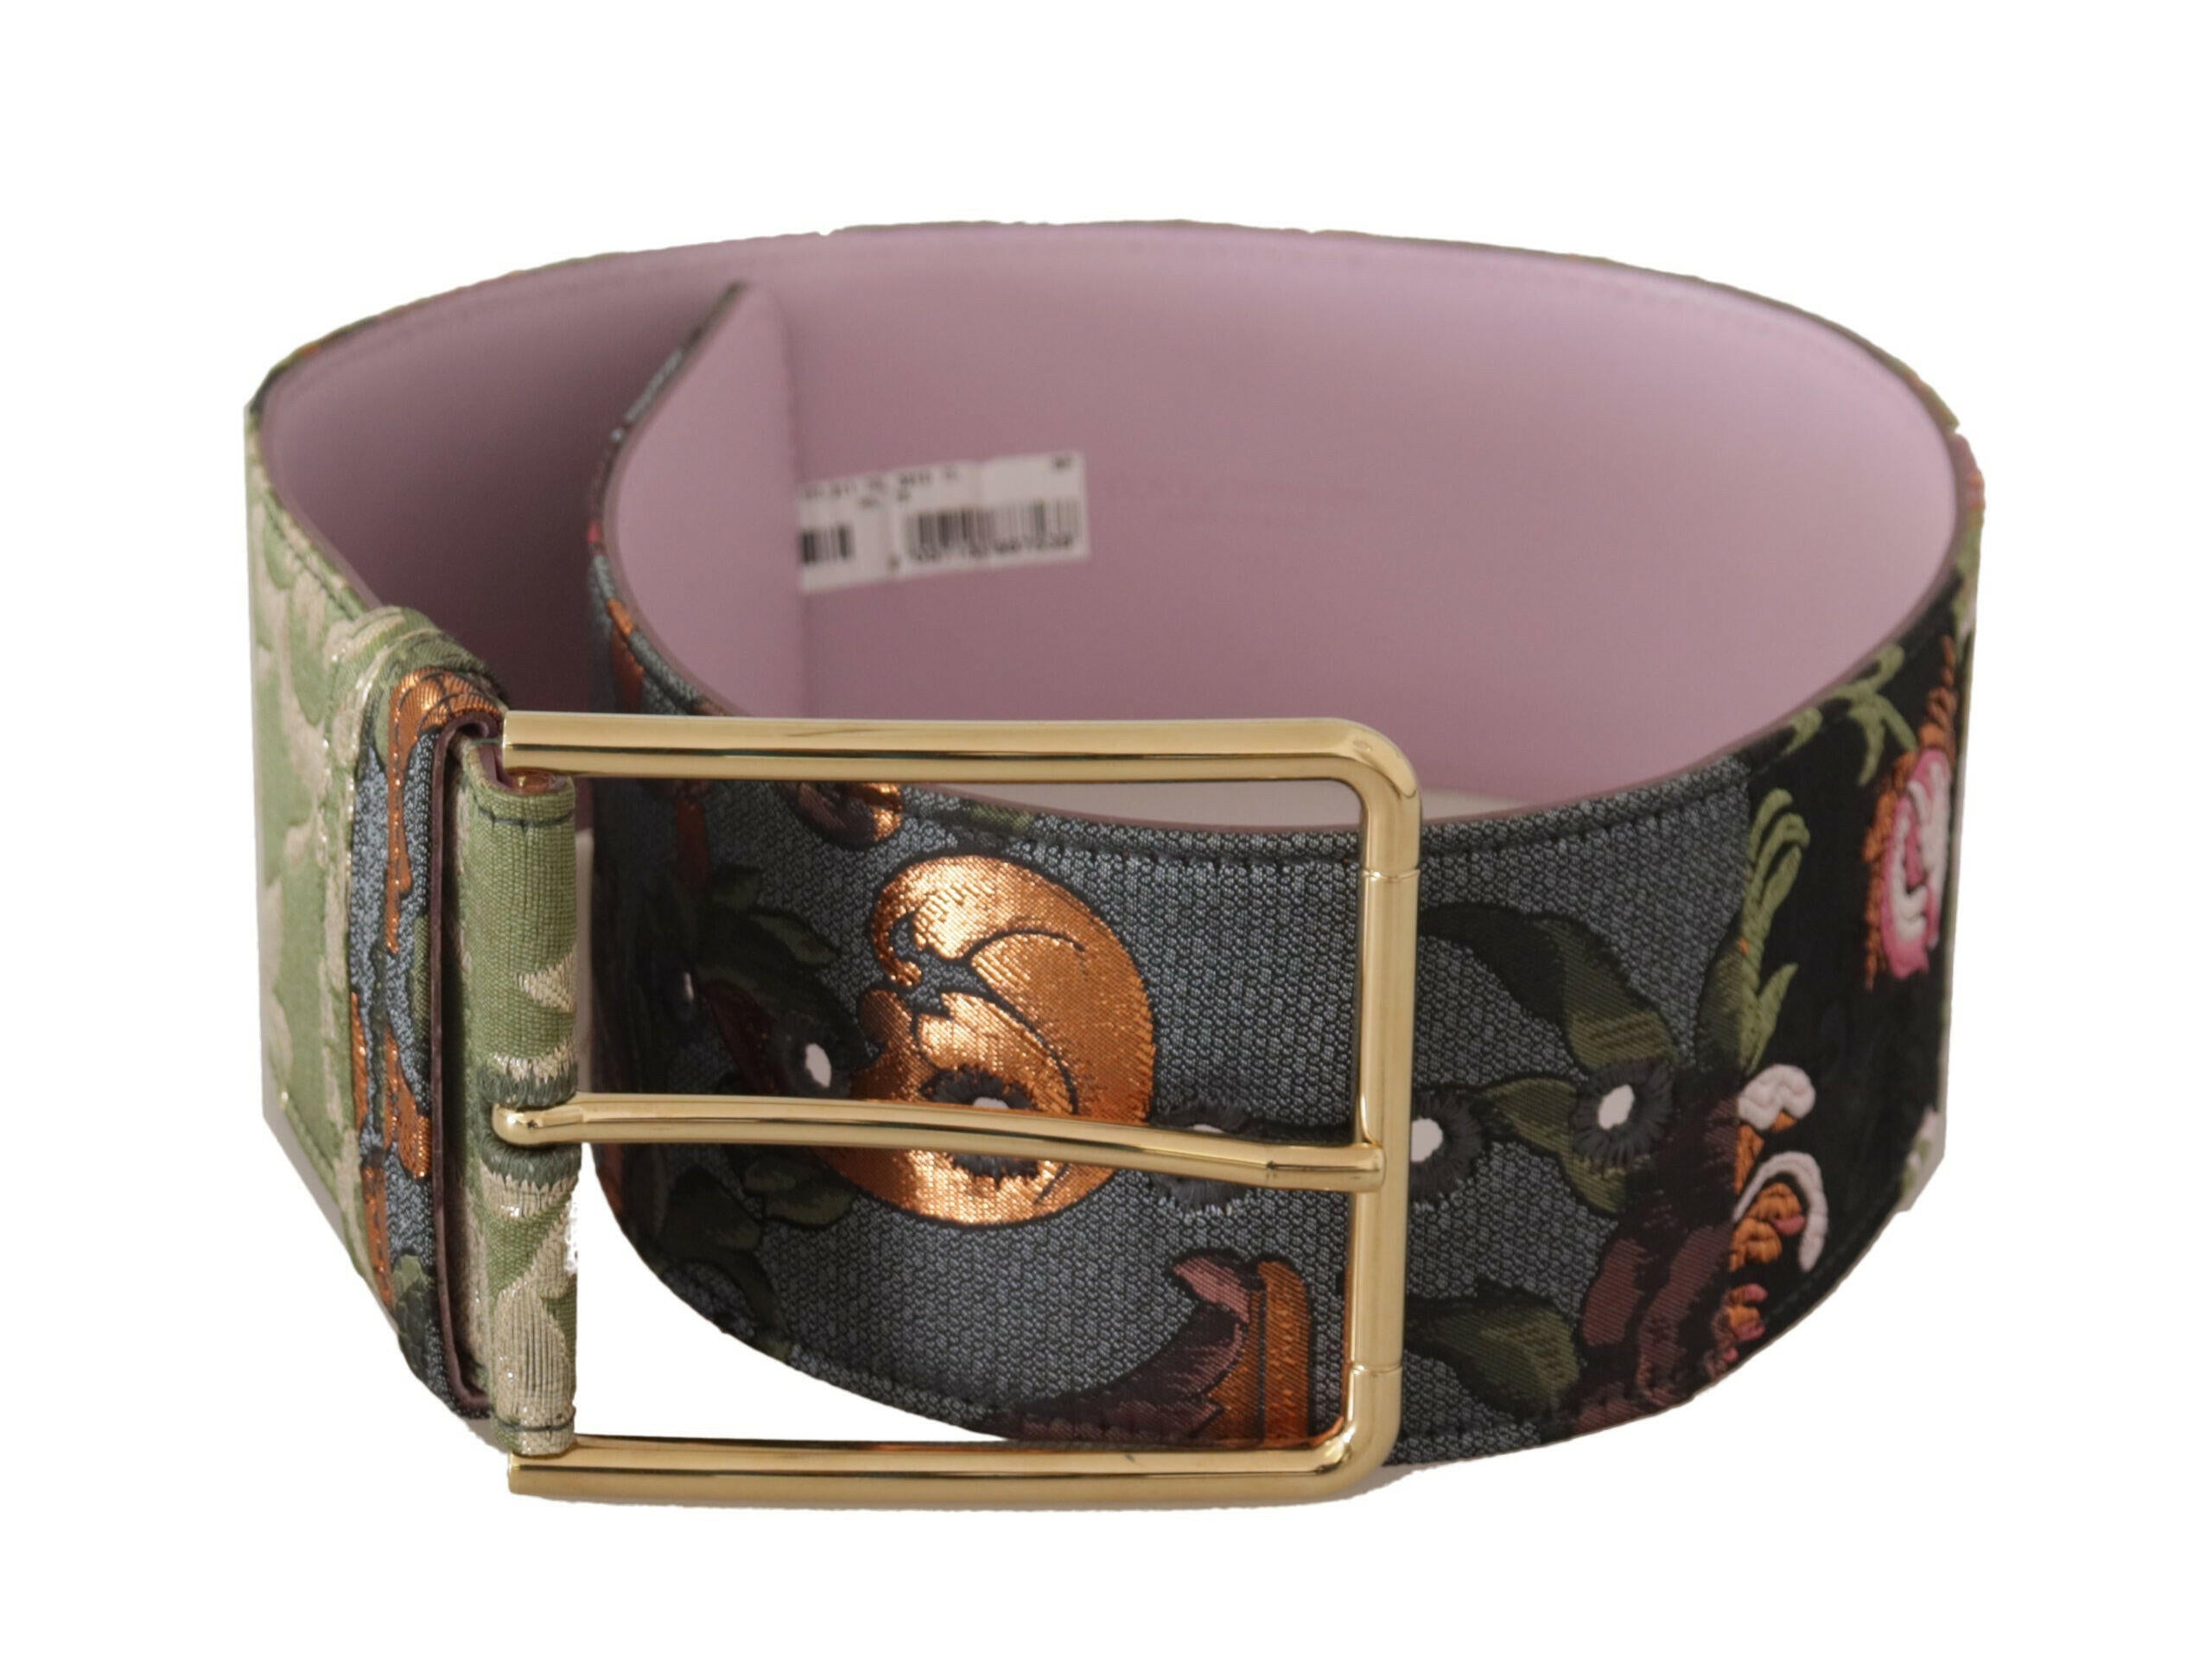 Dolce & Gabbana Multicolor Leather Embroidered Gold Metal Buckle Belt - GENUINE AUTHENTIC BRAND LLC  